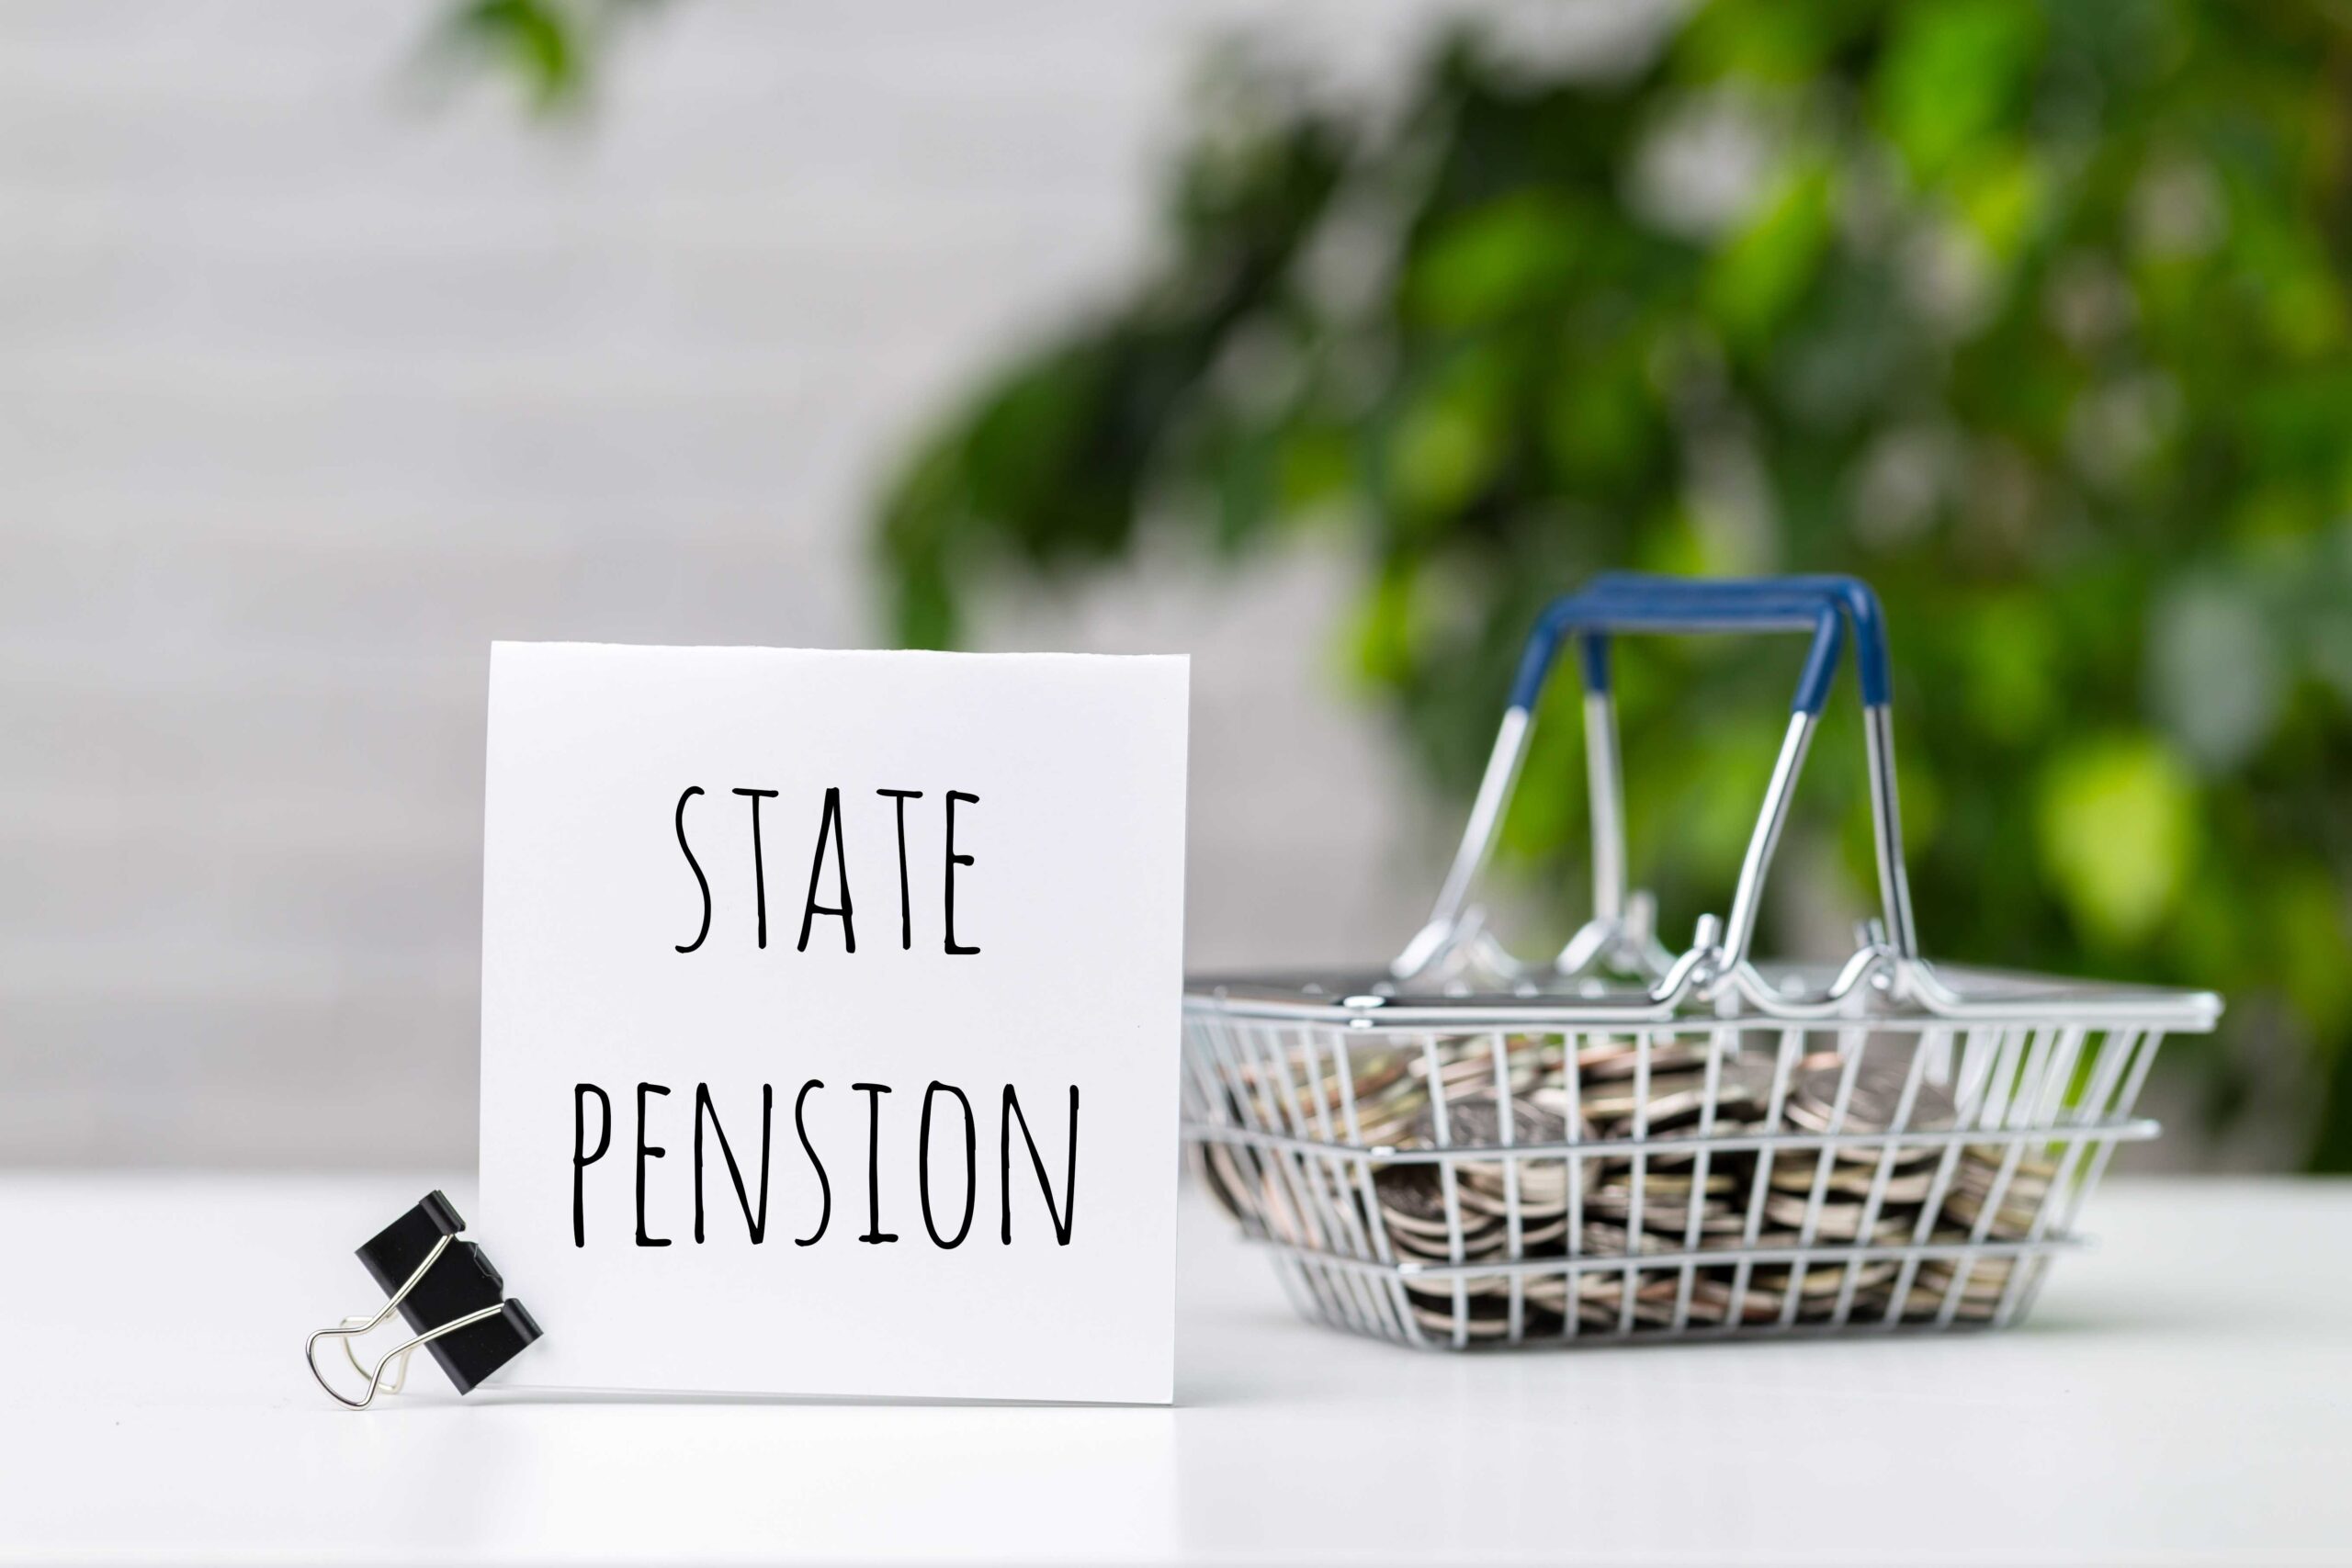 Deferring your state pension